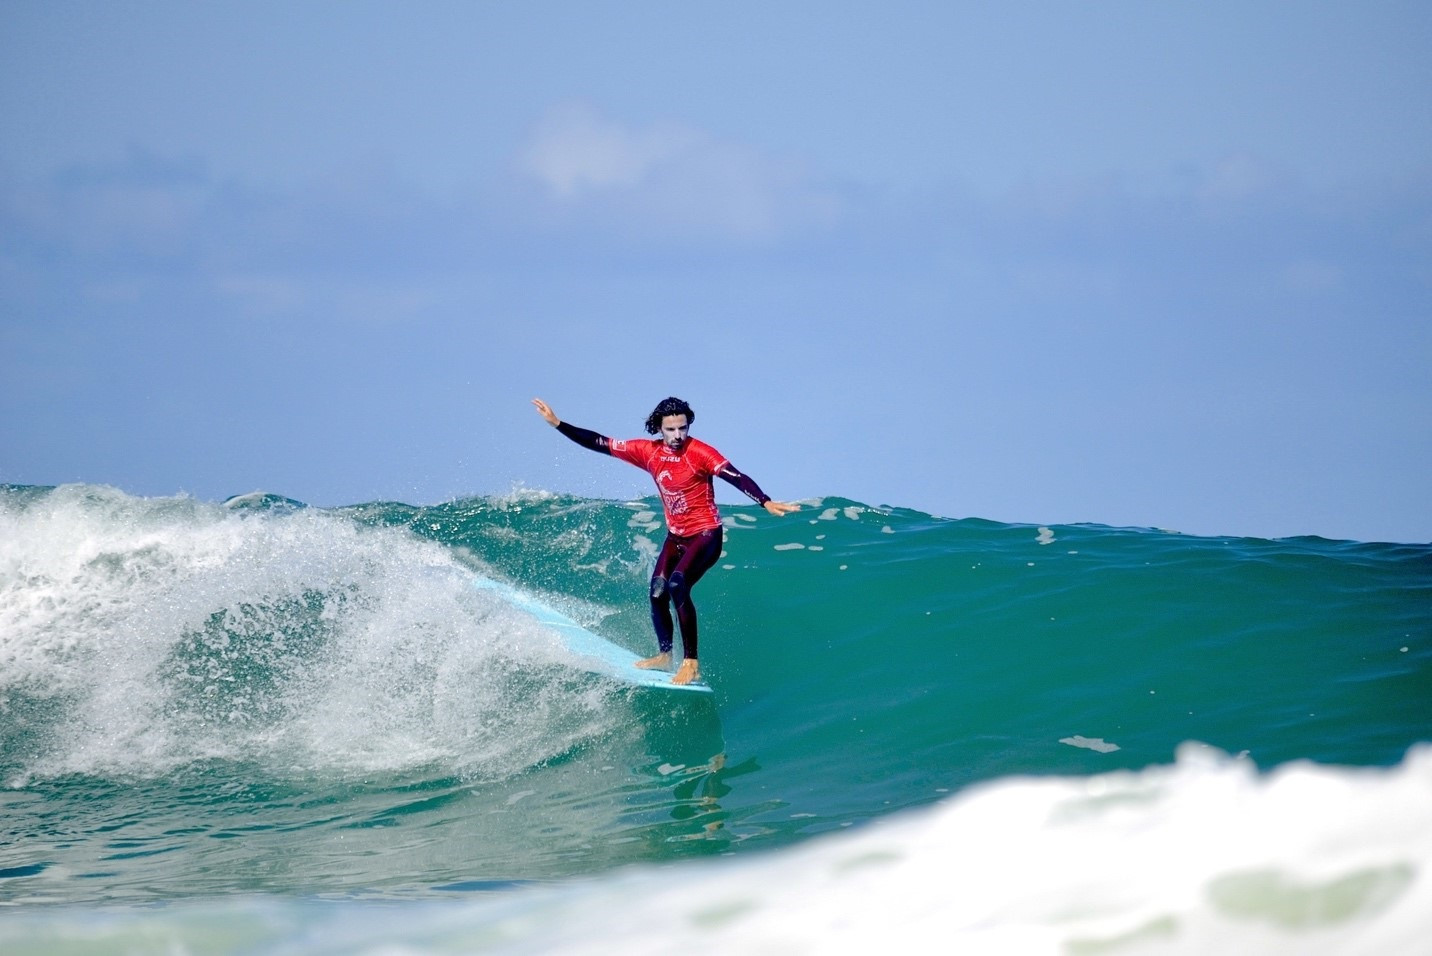 Biarritz announced as host of 2019 ISA World Longboard Surfing Championship